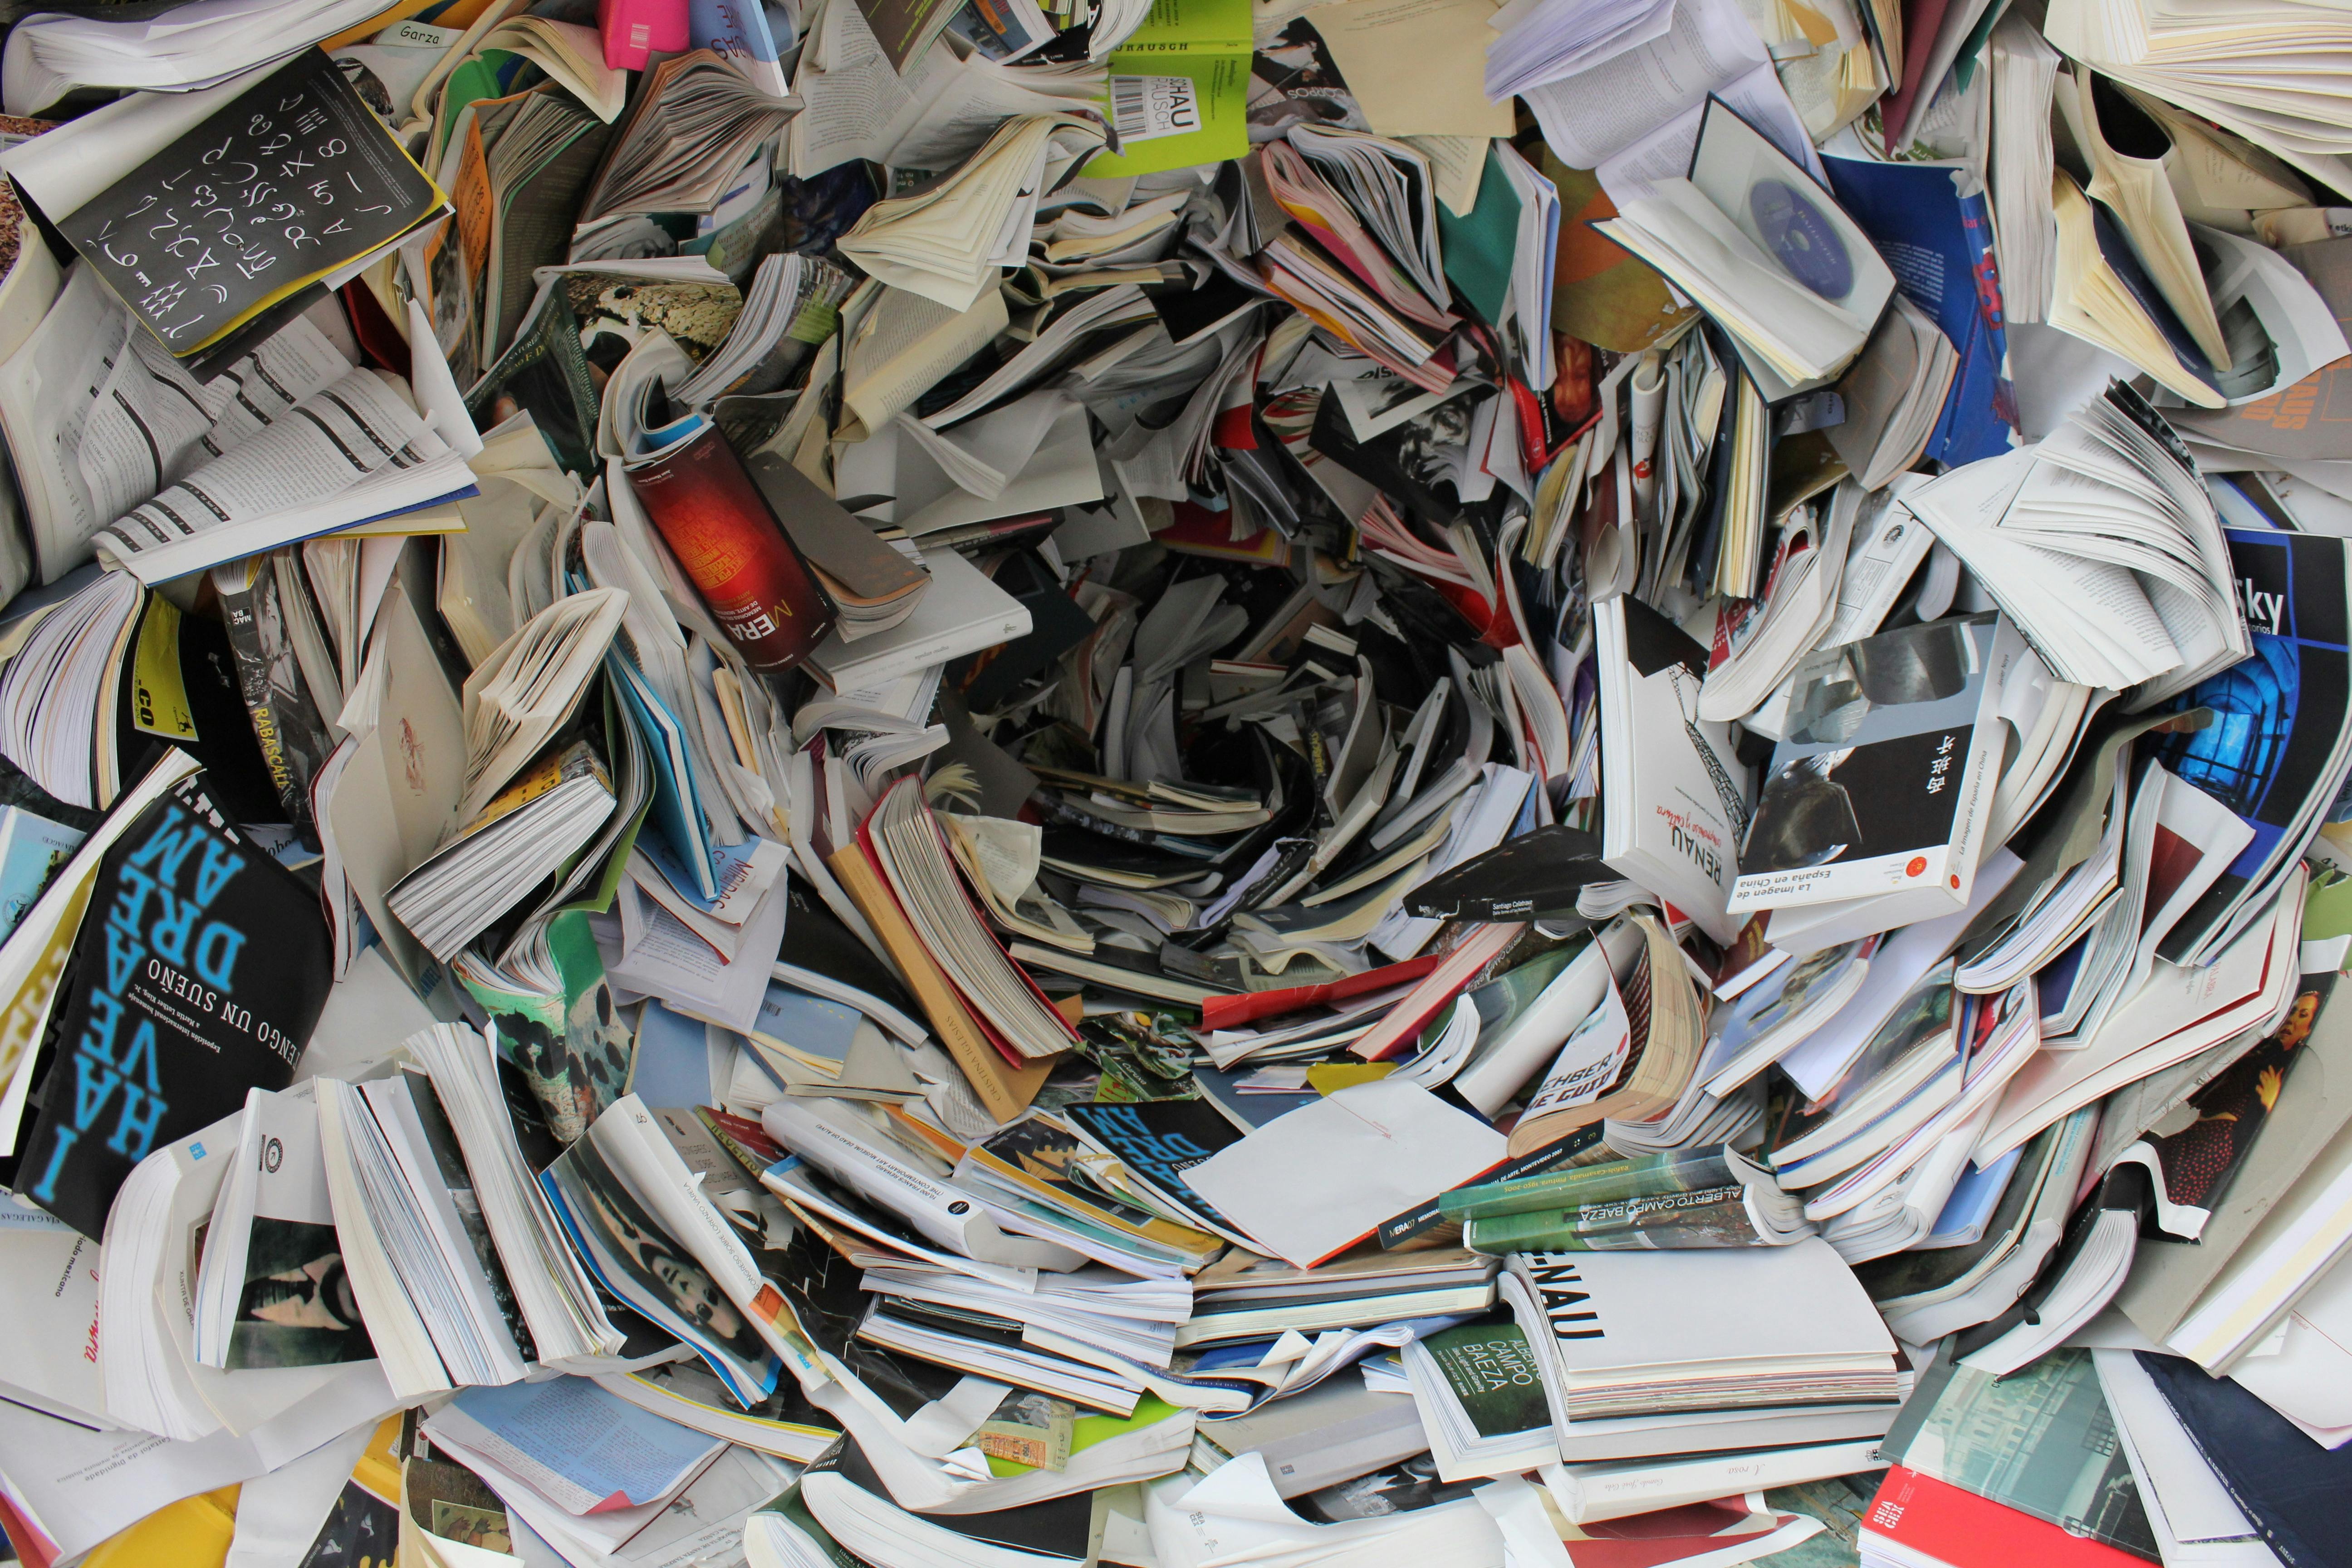 A chaotic pile of assorted books and printed materials haphazardly strewn about, visually representing the need for best practices for Python custom collections to organize data effectively.